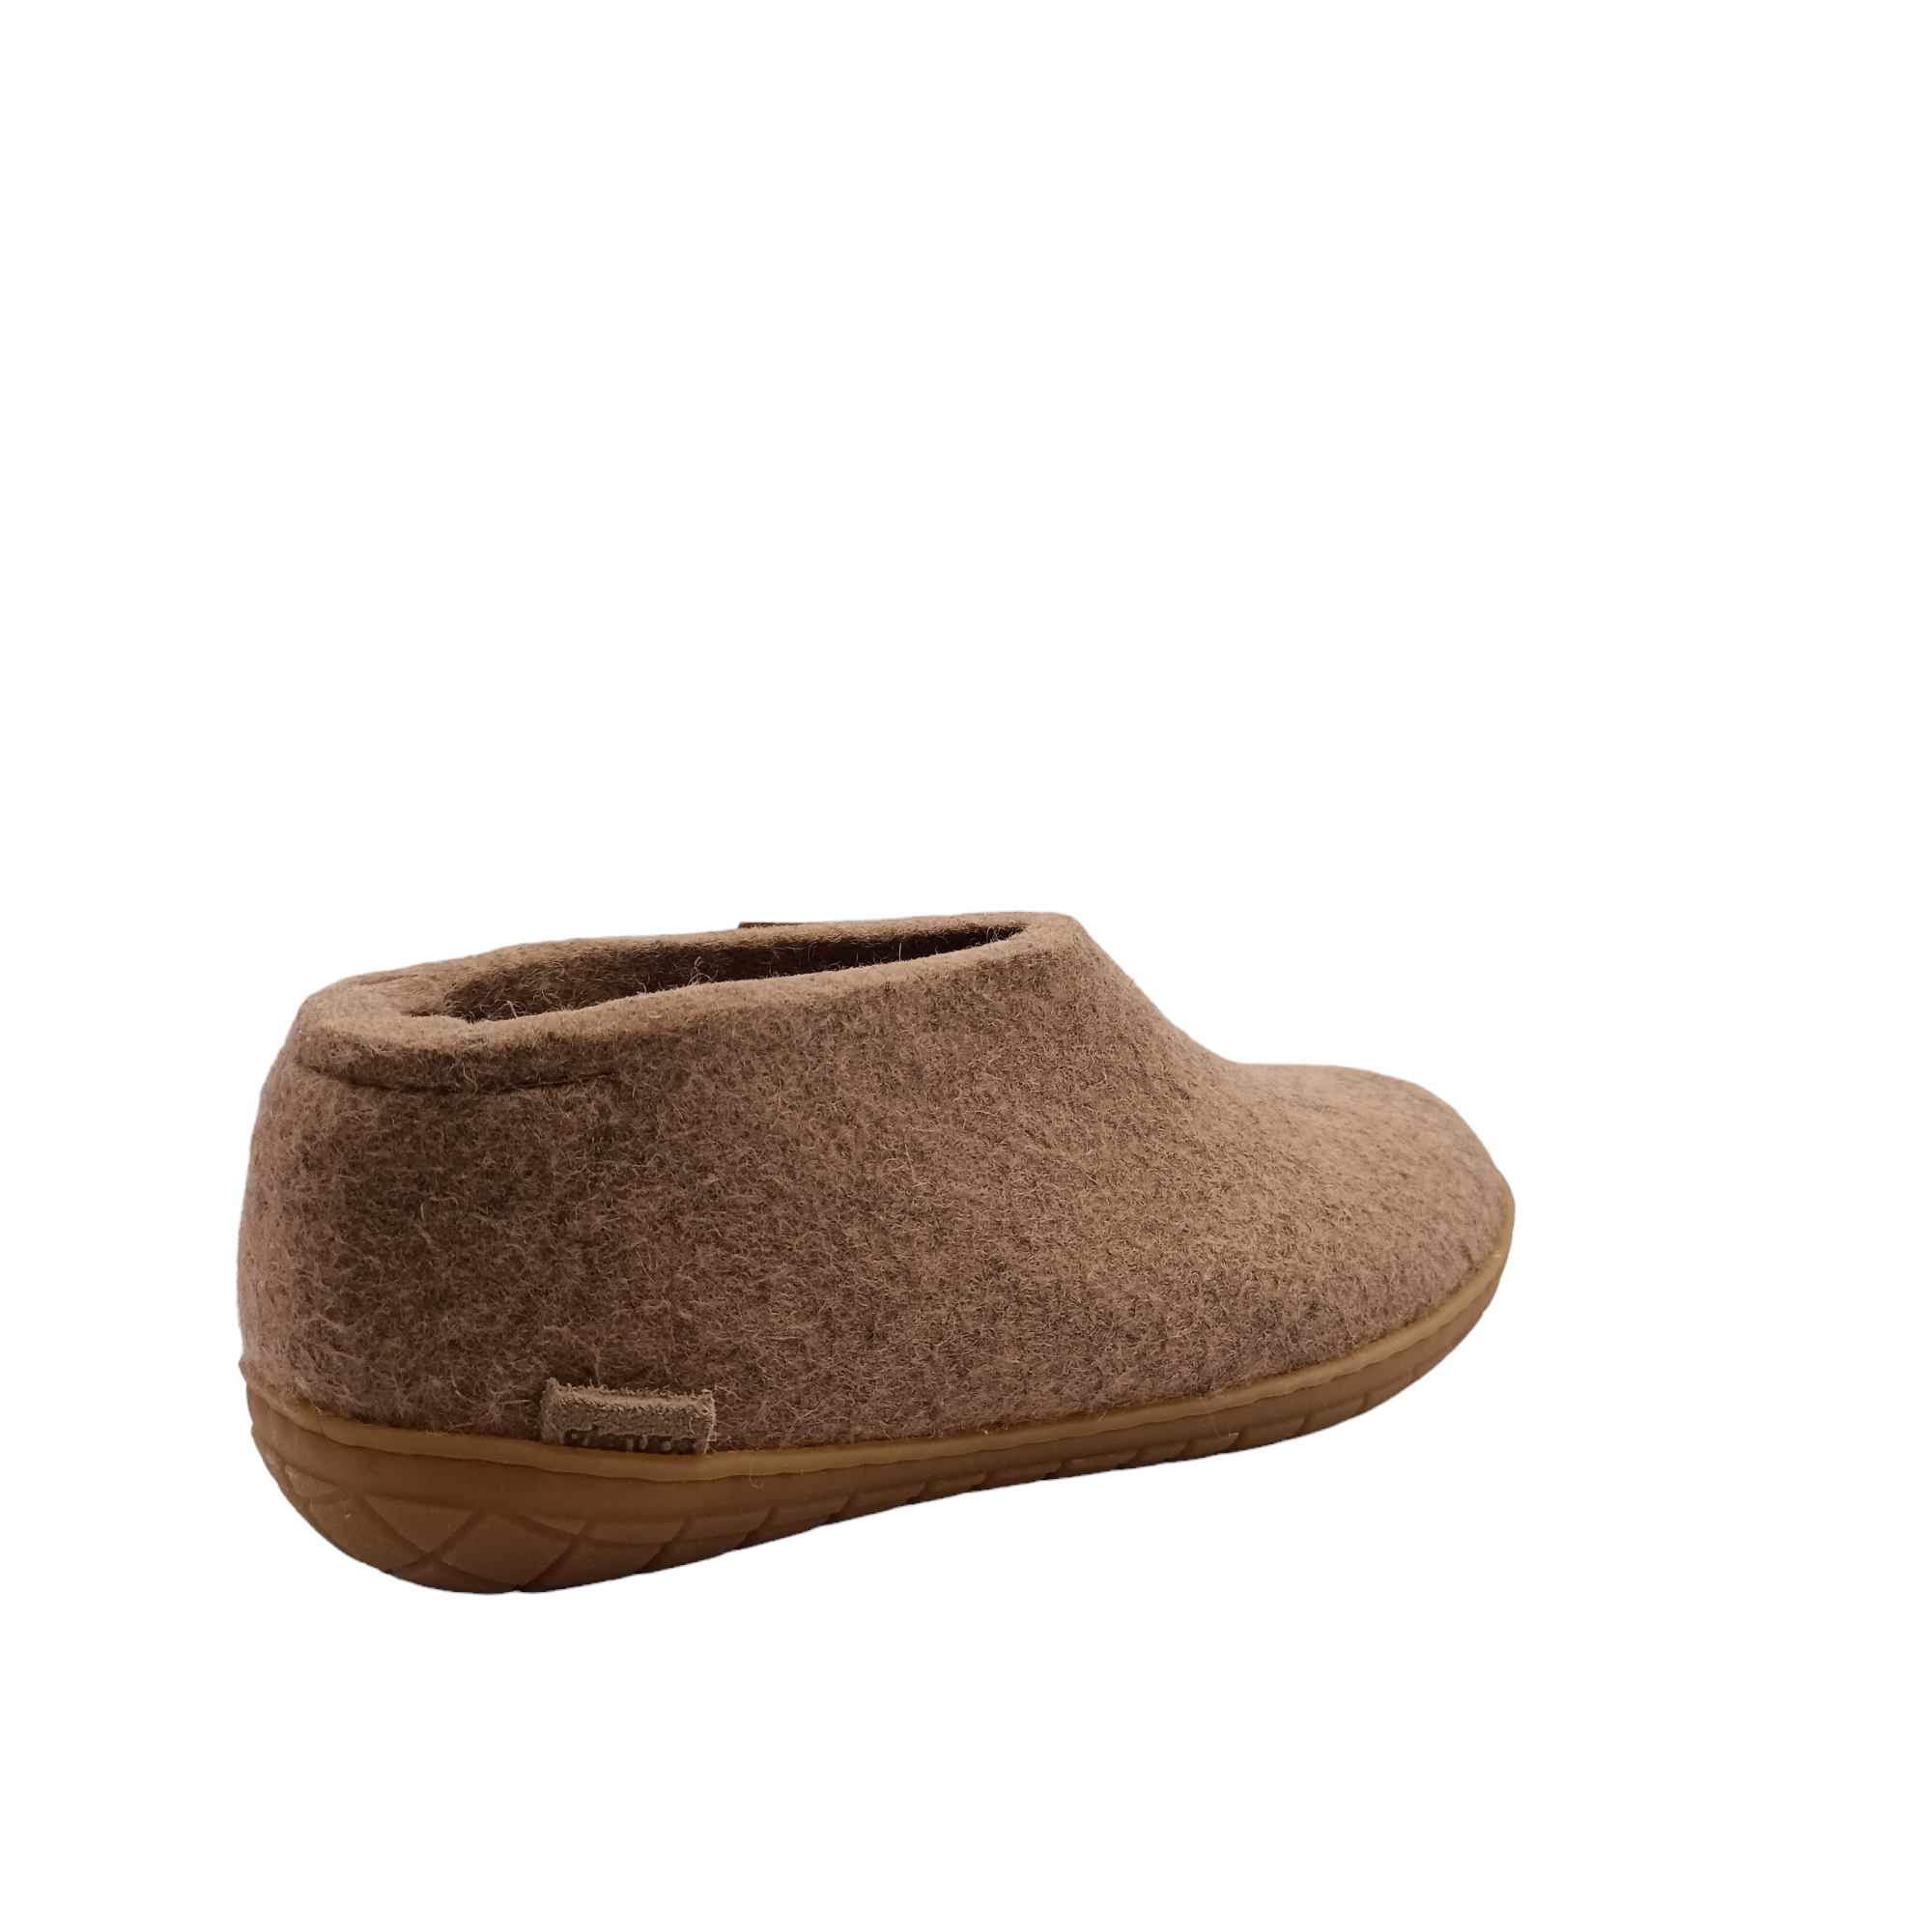 Back angle view off sand coloured felt wool Glerup shoe or slipper with natural rubber sole. Shop slippers online and instore with shoe&amp;me Mount Maunganui.